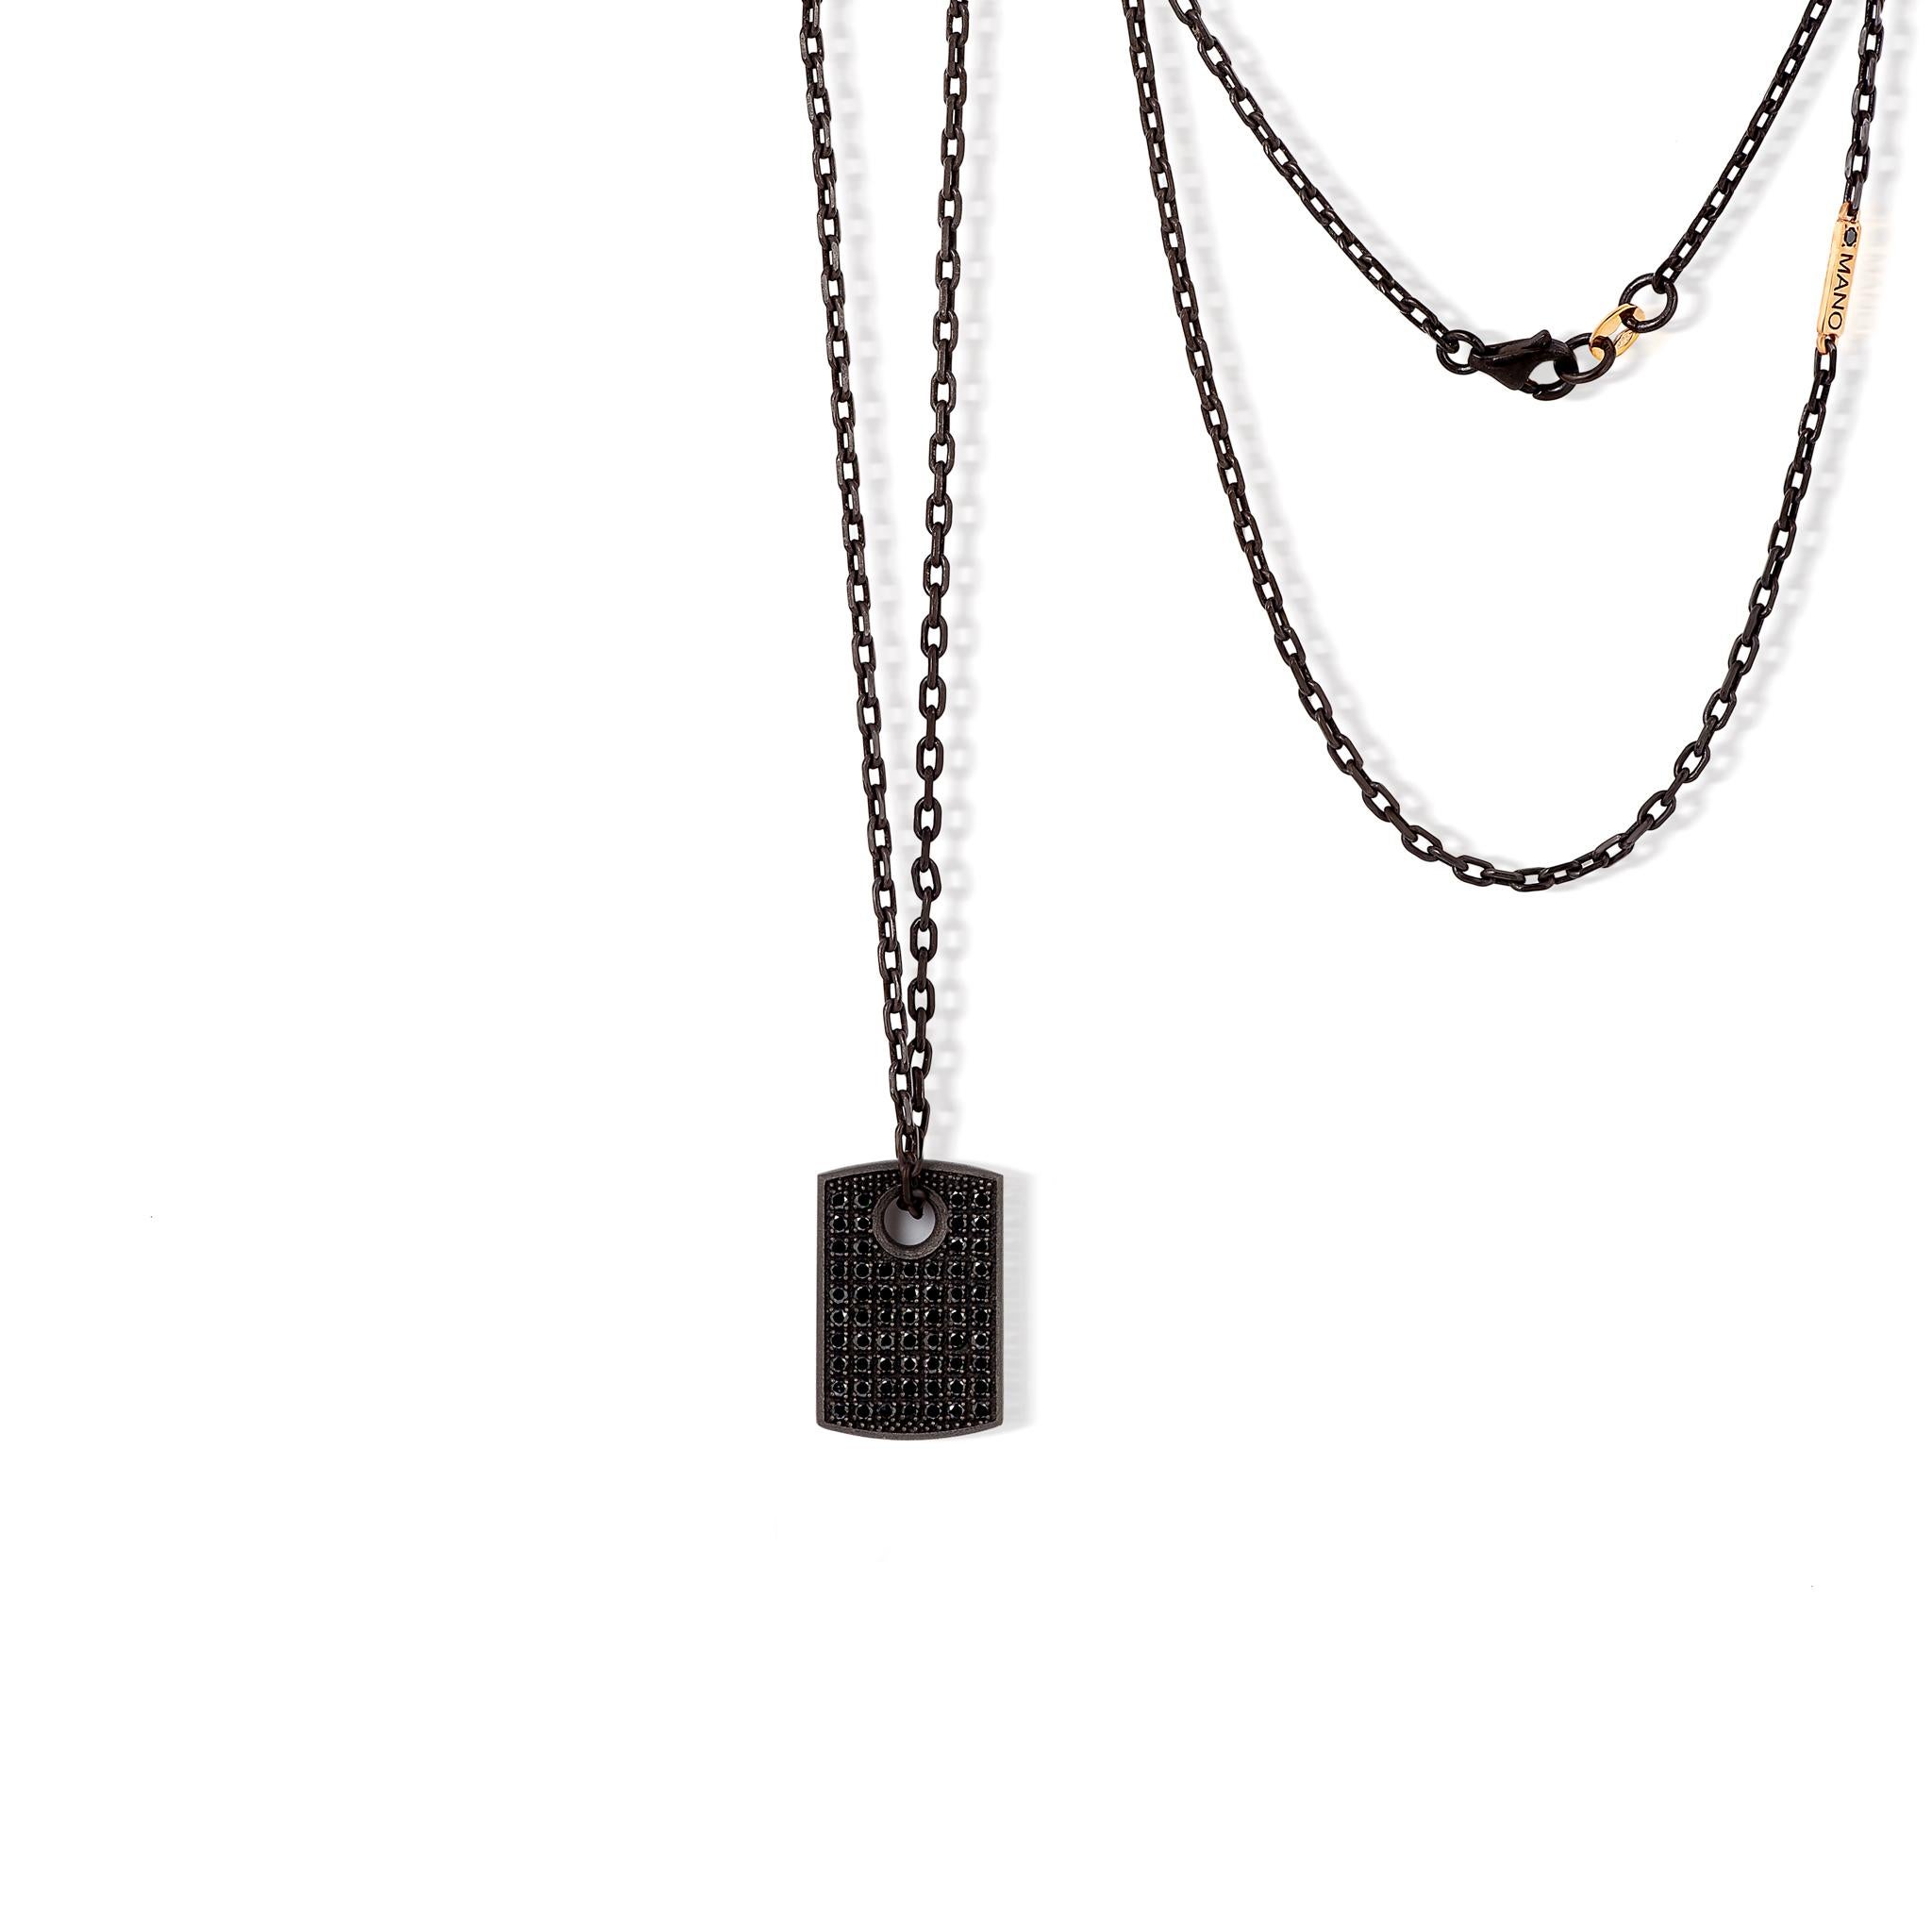 Men's necklace in titanium, black diamonds, 18 kt red gold, 9 kt red gold and chain. The titanium plaque, the star of this necklace, is completely covered with black diamonds. The pavè of 61 black diamonds occupies the entire surface of the plaque.